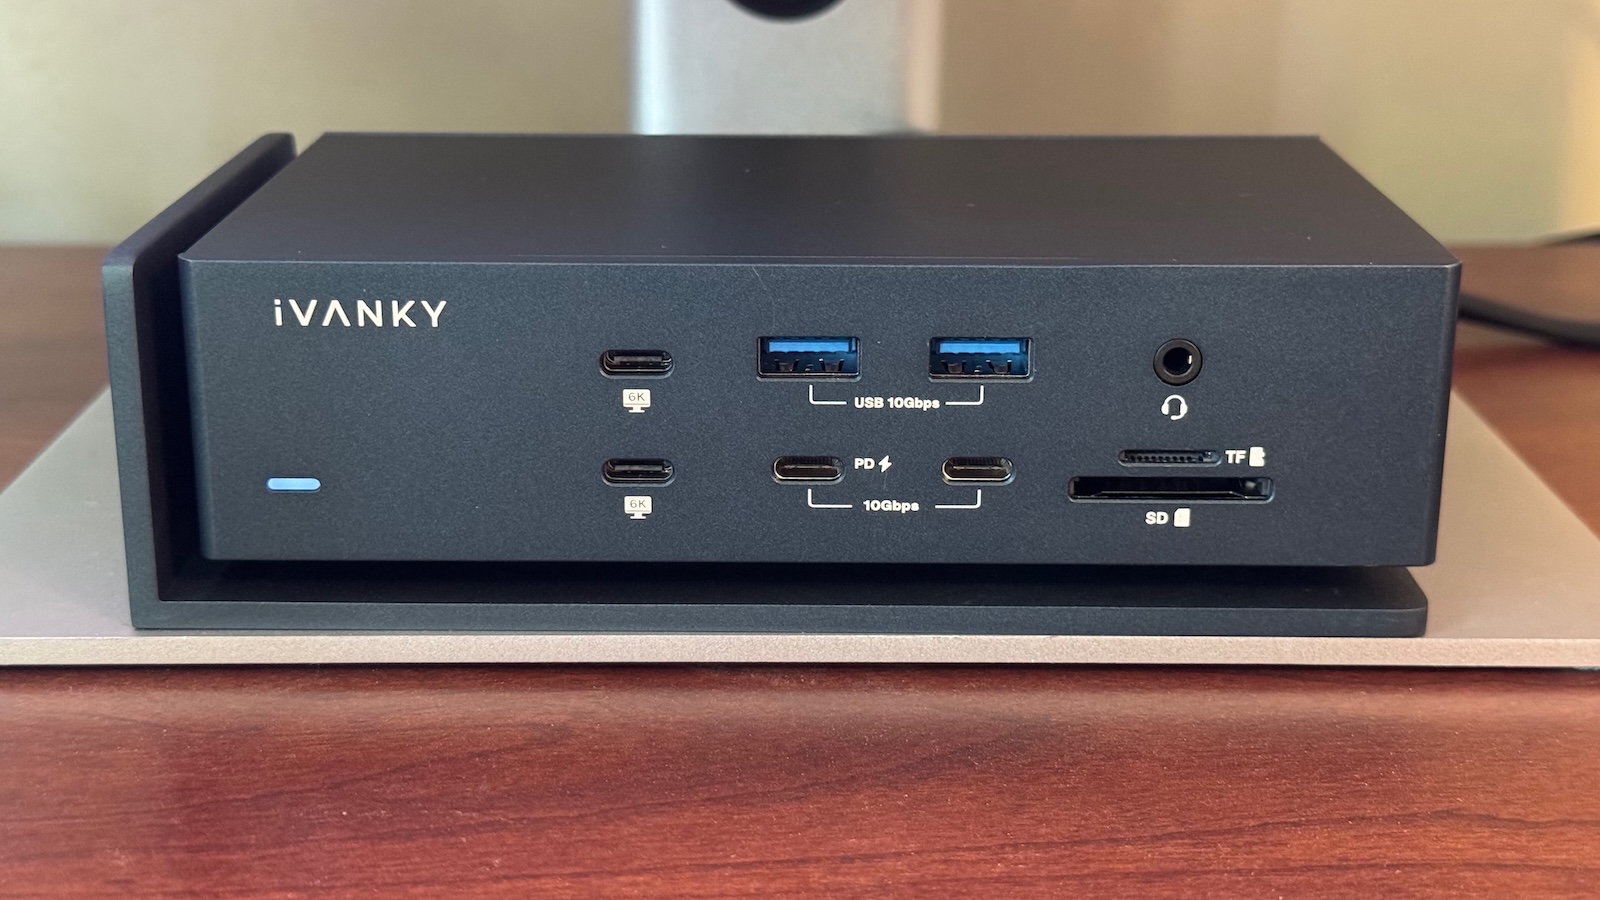 Review: iVANKY's FusionDock Max 1 Delivers Extreme Versatility With Dual Thunderbolt Connectivity